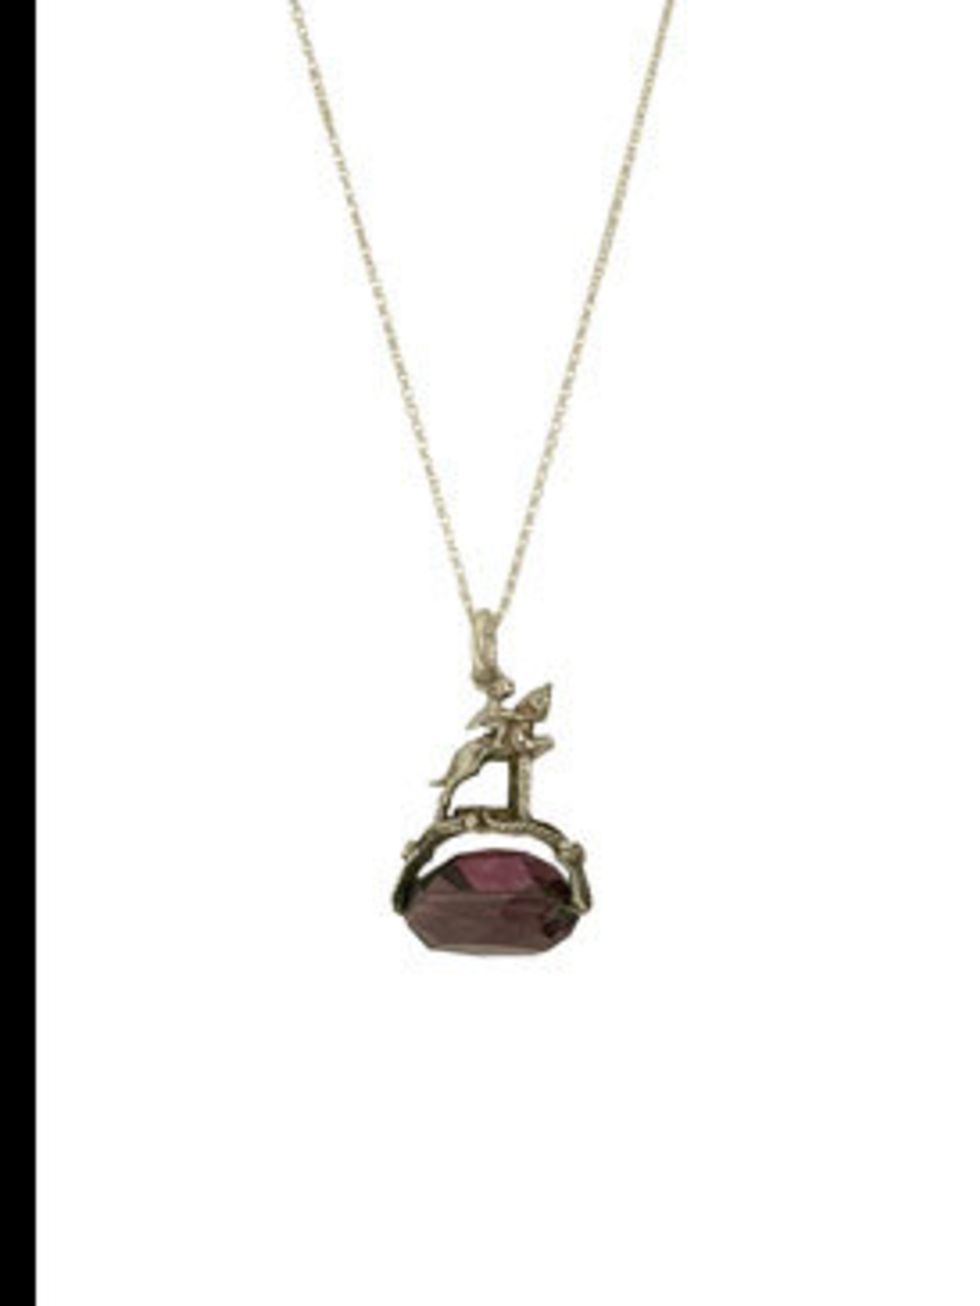 <p>Amethyst pendant, £74, by Annina Vogel at <a href="http://www.kabiri.co.uk/jewellery/necklaces/horse_jump_charm_pendant">Kabiri</a></p>